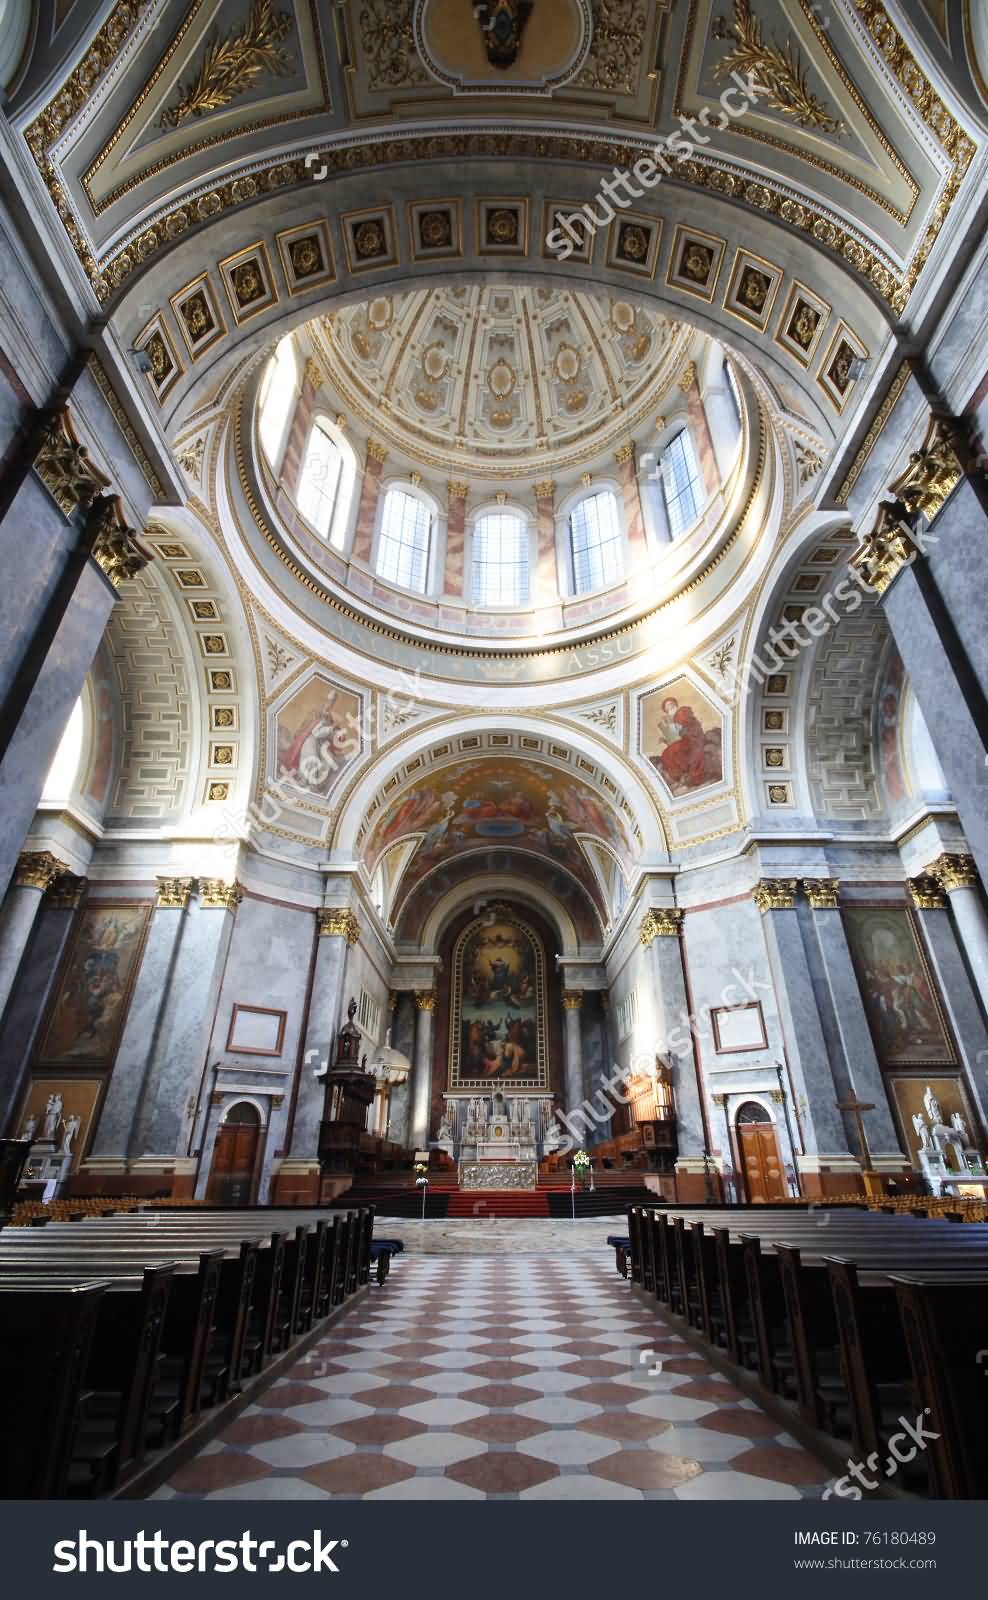 Inside Altar View Of The Esztergom Basilica In Hungary